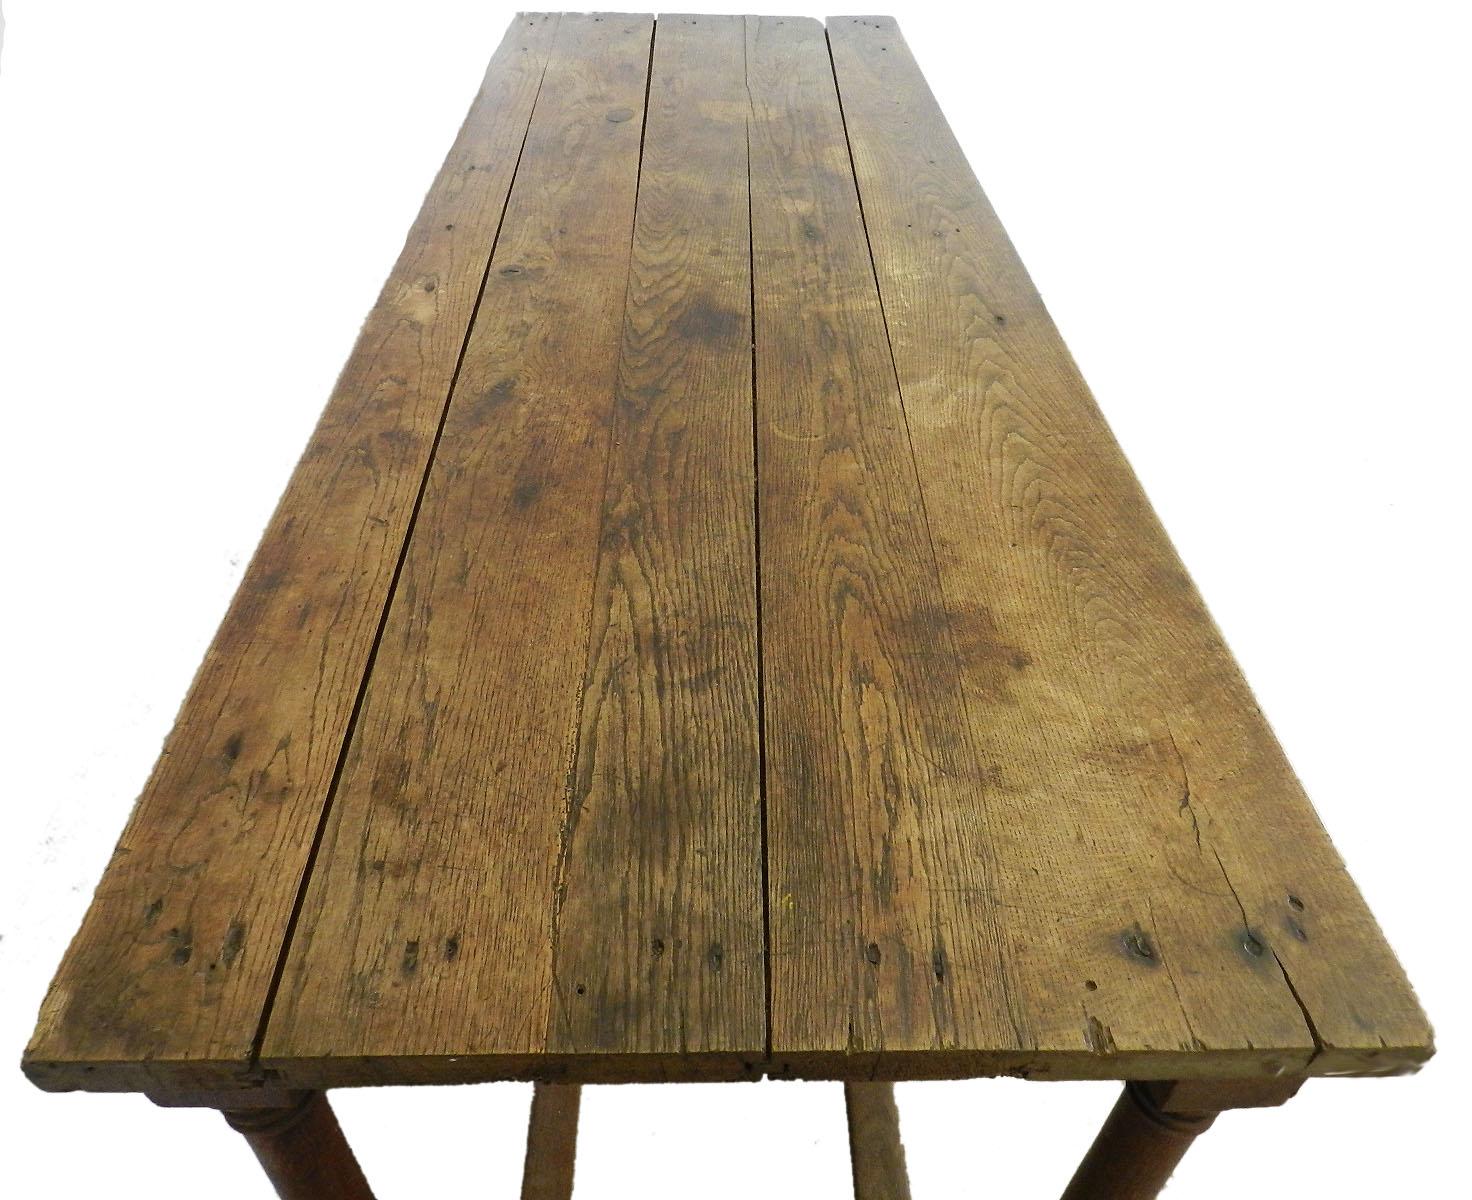 French Provincial French Refectory Table Late 18th Century Provincial Oak Server Dining Table